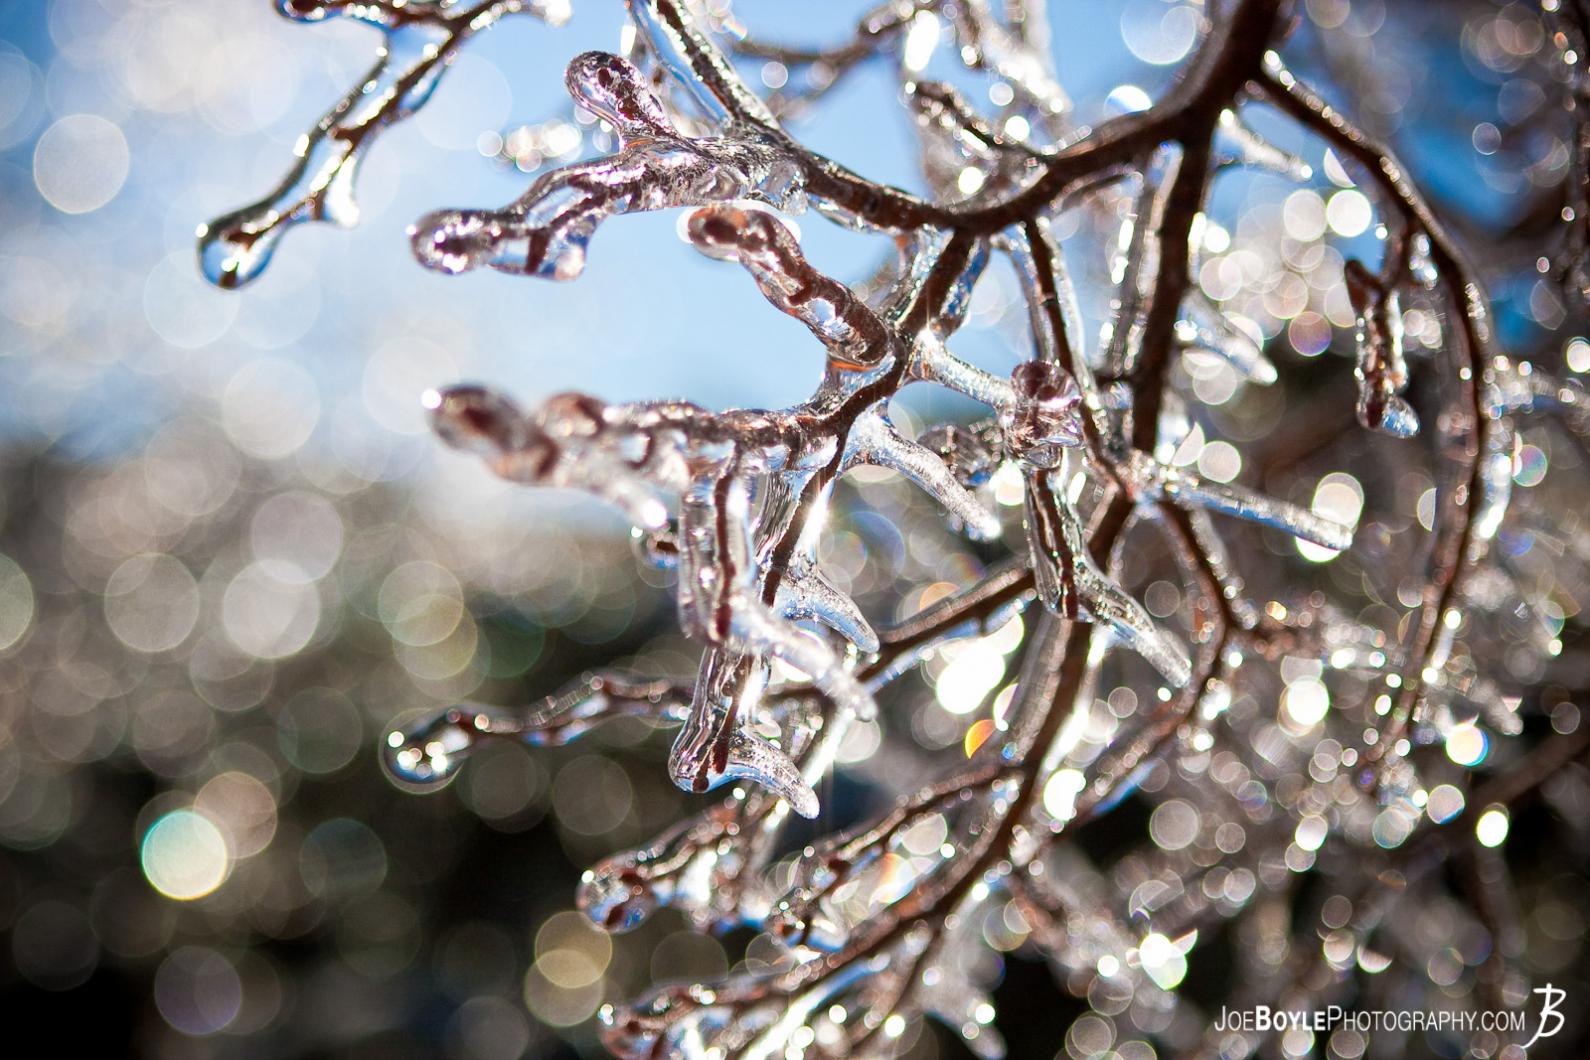 I captured this photo of tree branches covered in ice after an ice storm came through the Cleveland area.